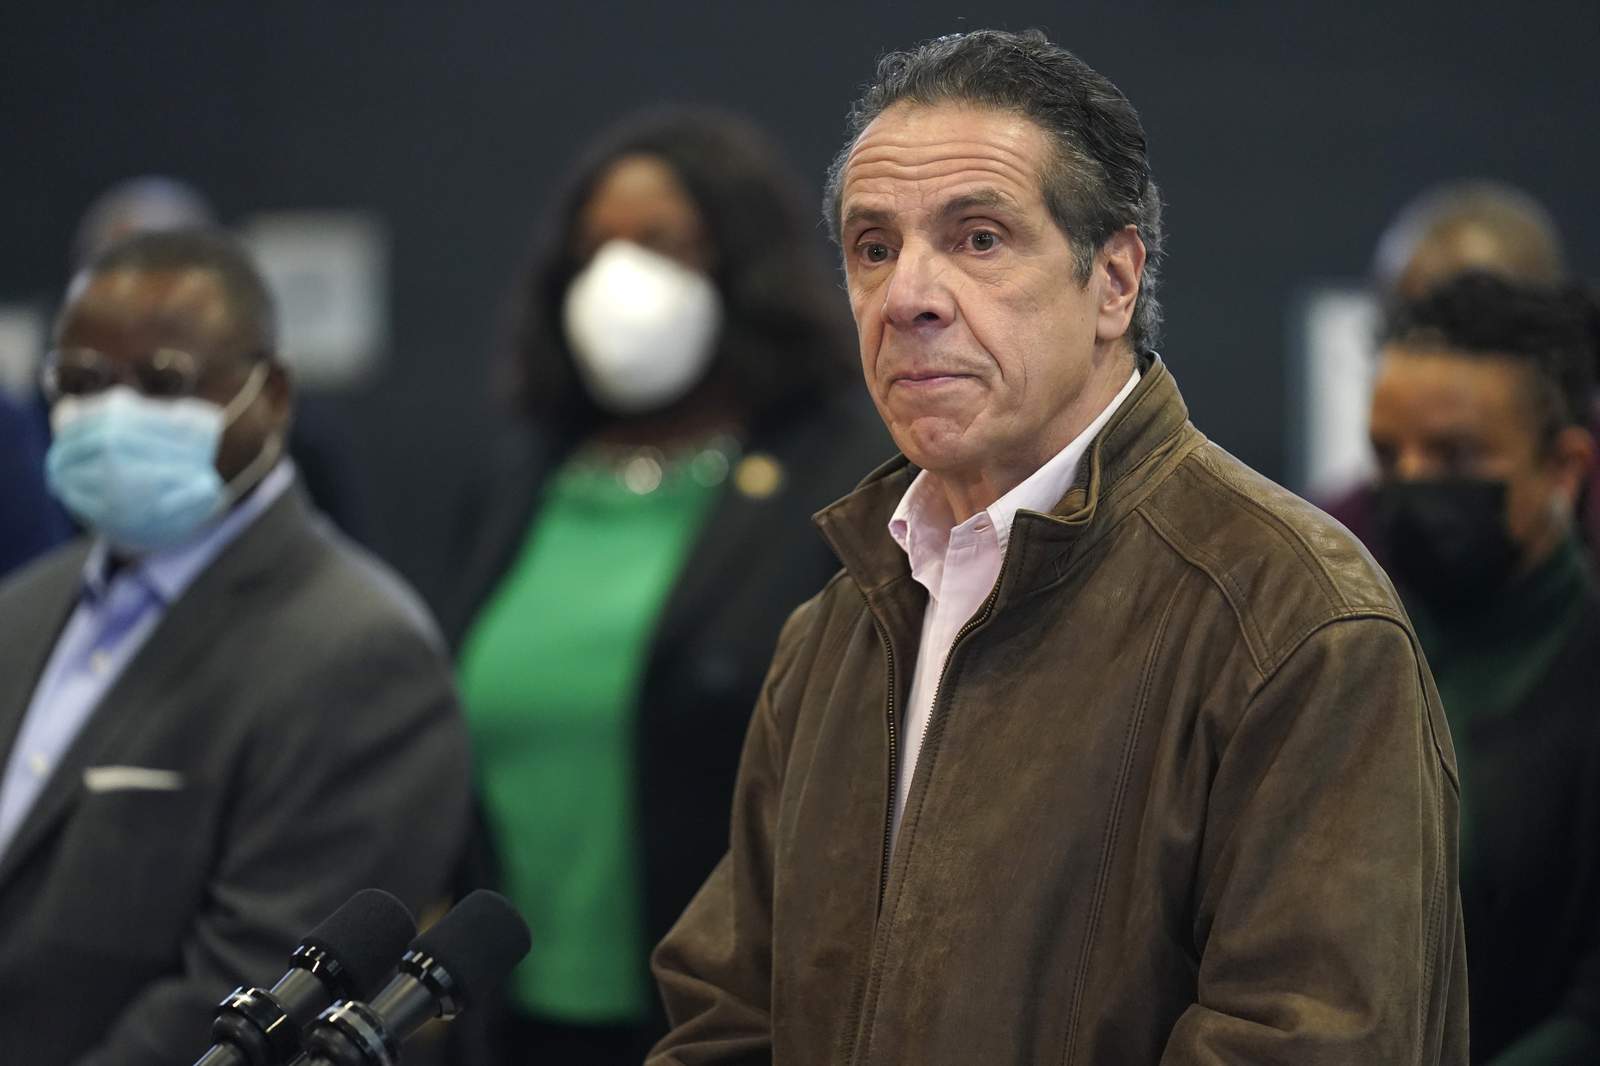 Cuomo avoids public amid outcry over harassment allegations